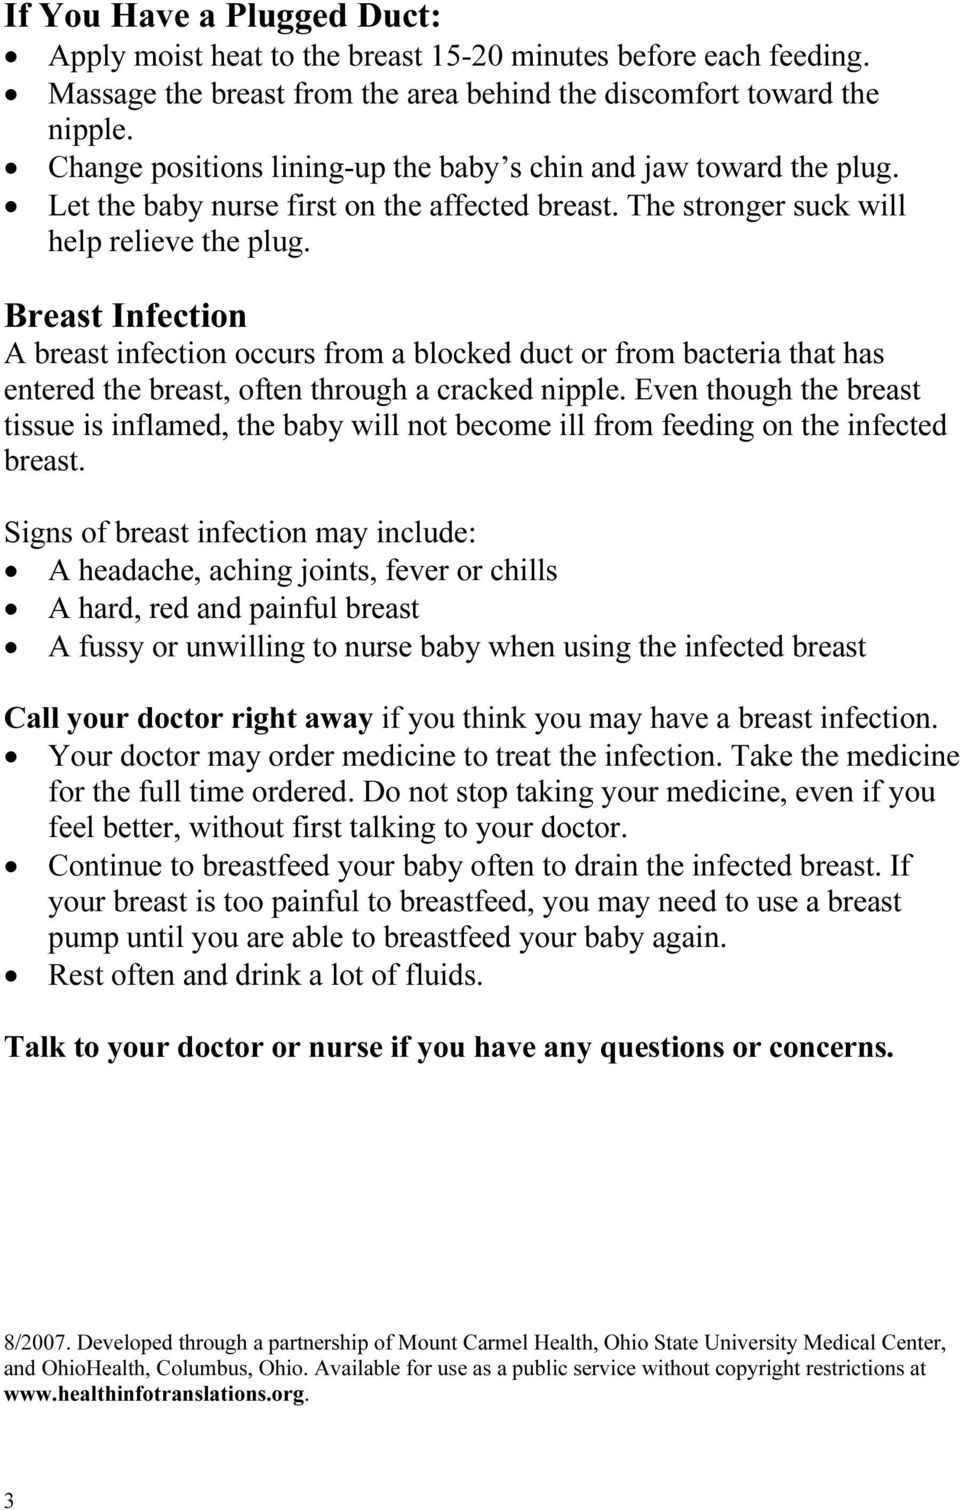 Breast Infection A breast infection occurs from a blocked duct or from bacteria that has entered the breast, often through a cracked nipple.